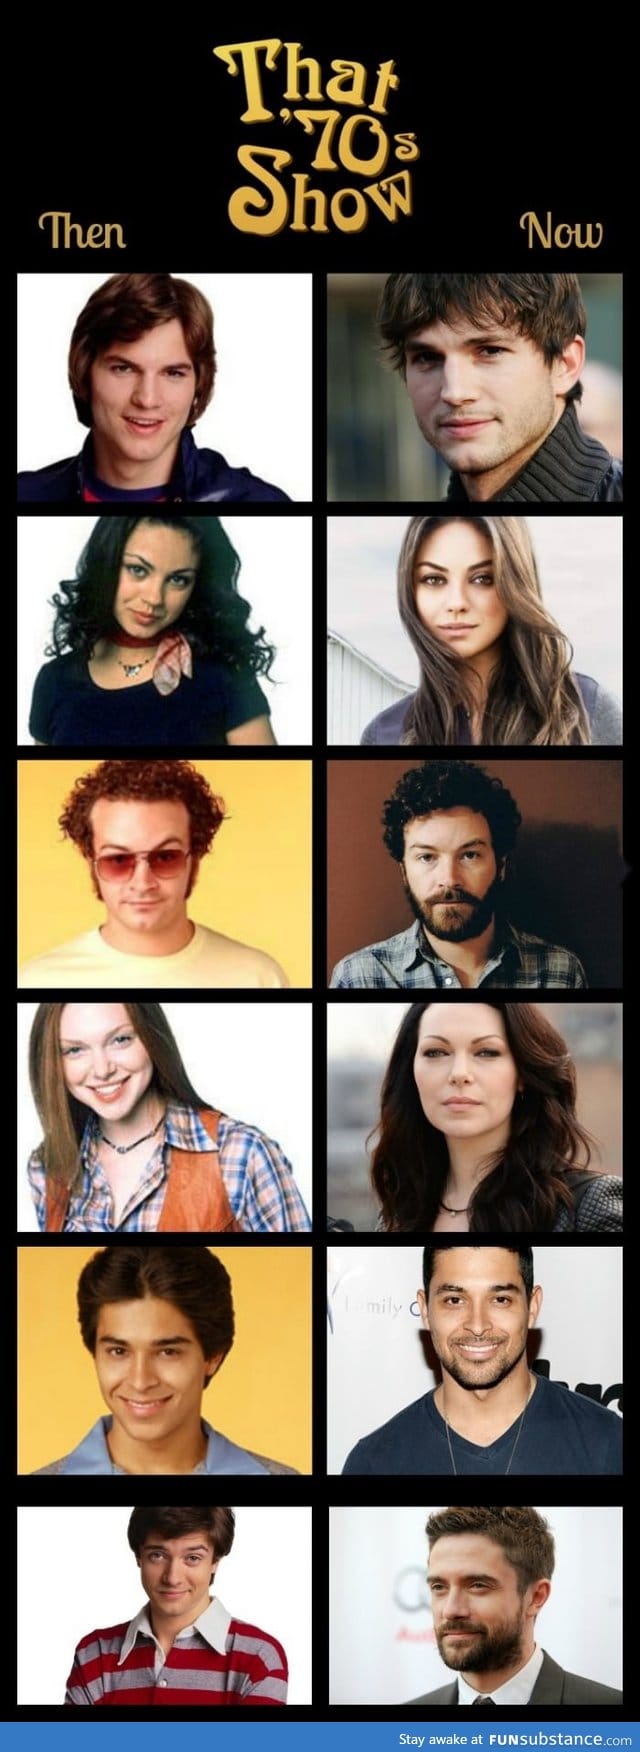 That '70s Show cast - then and now